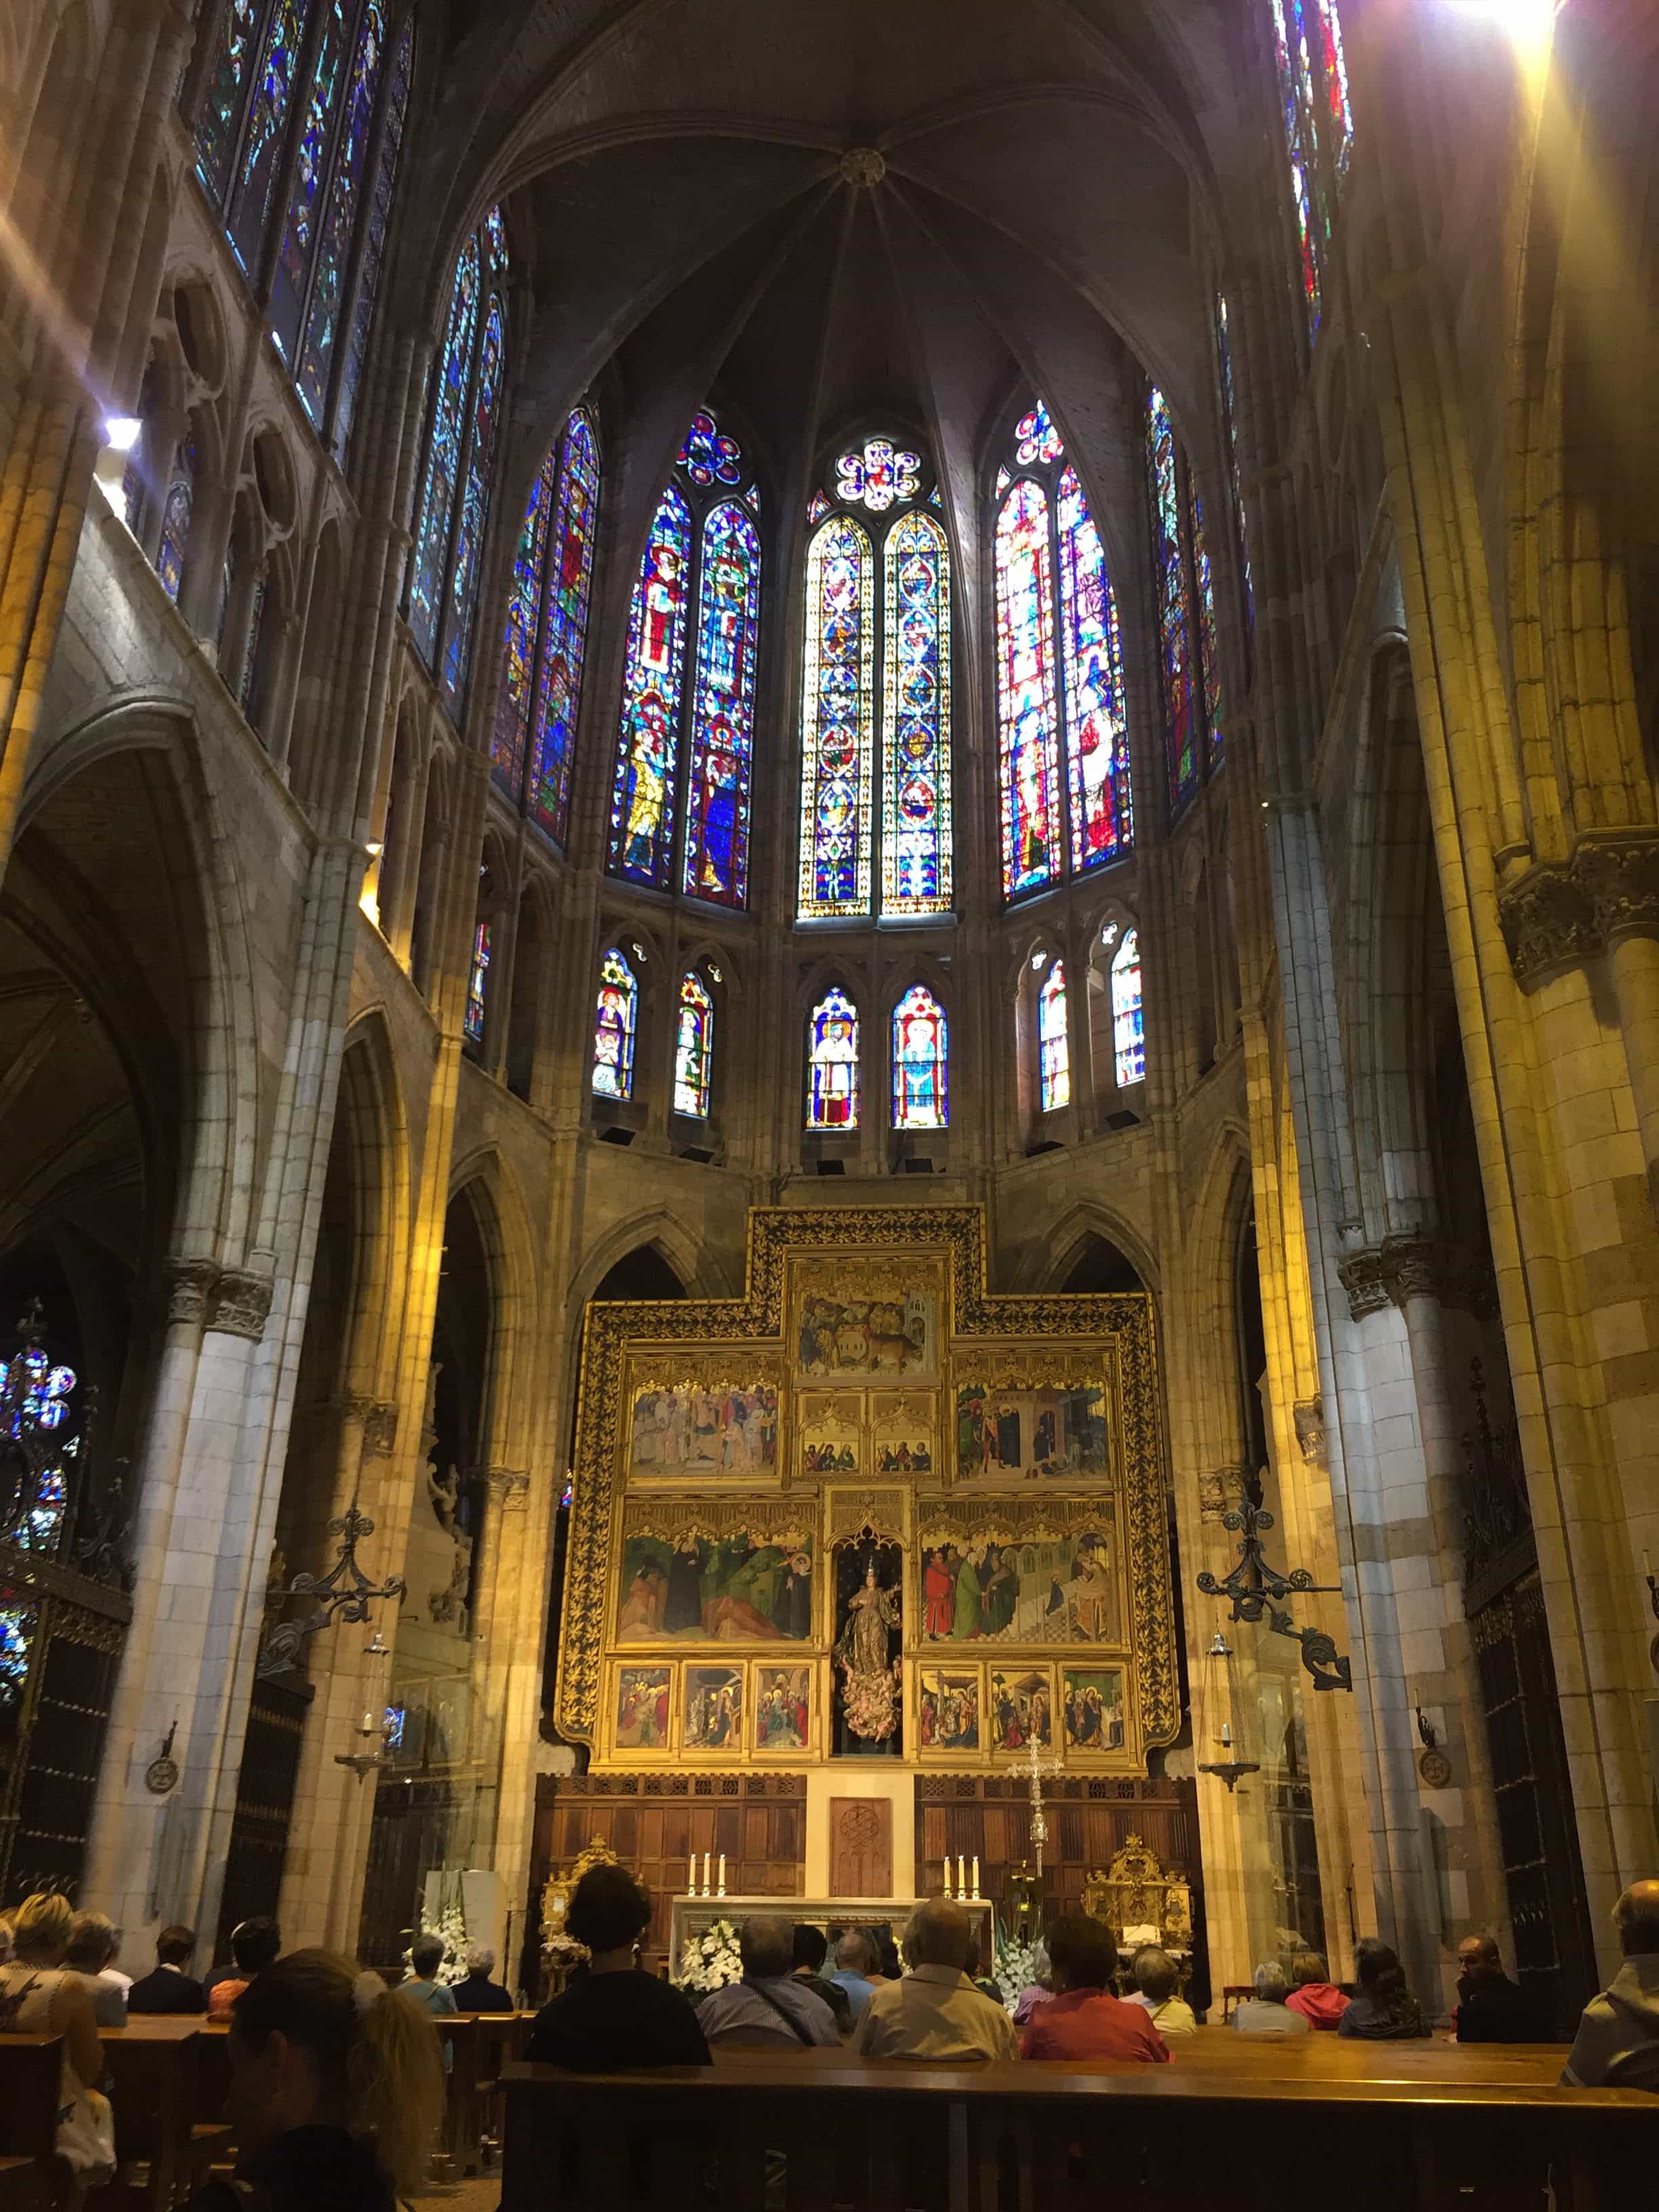 Stained glass windows inside cathedral